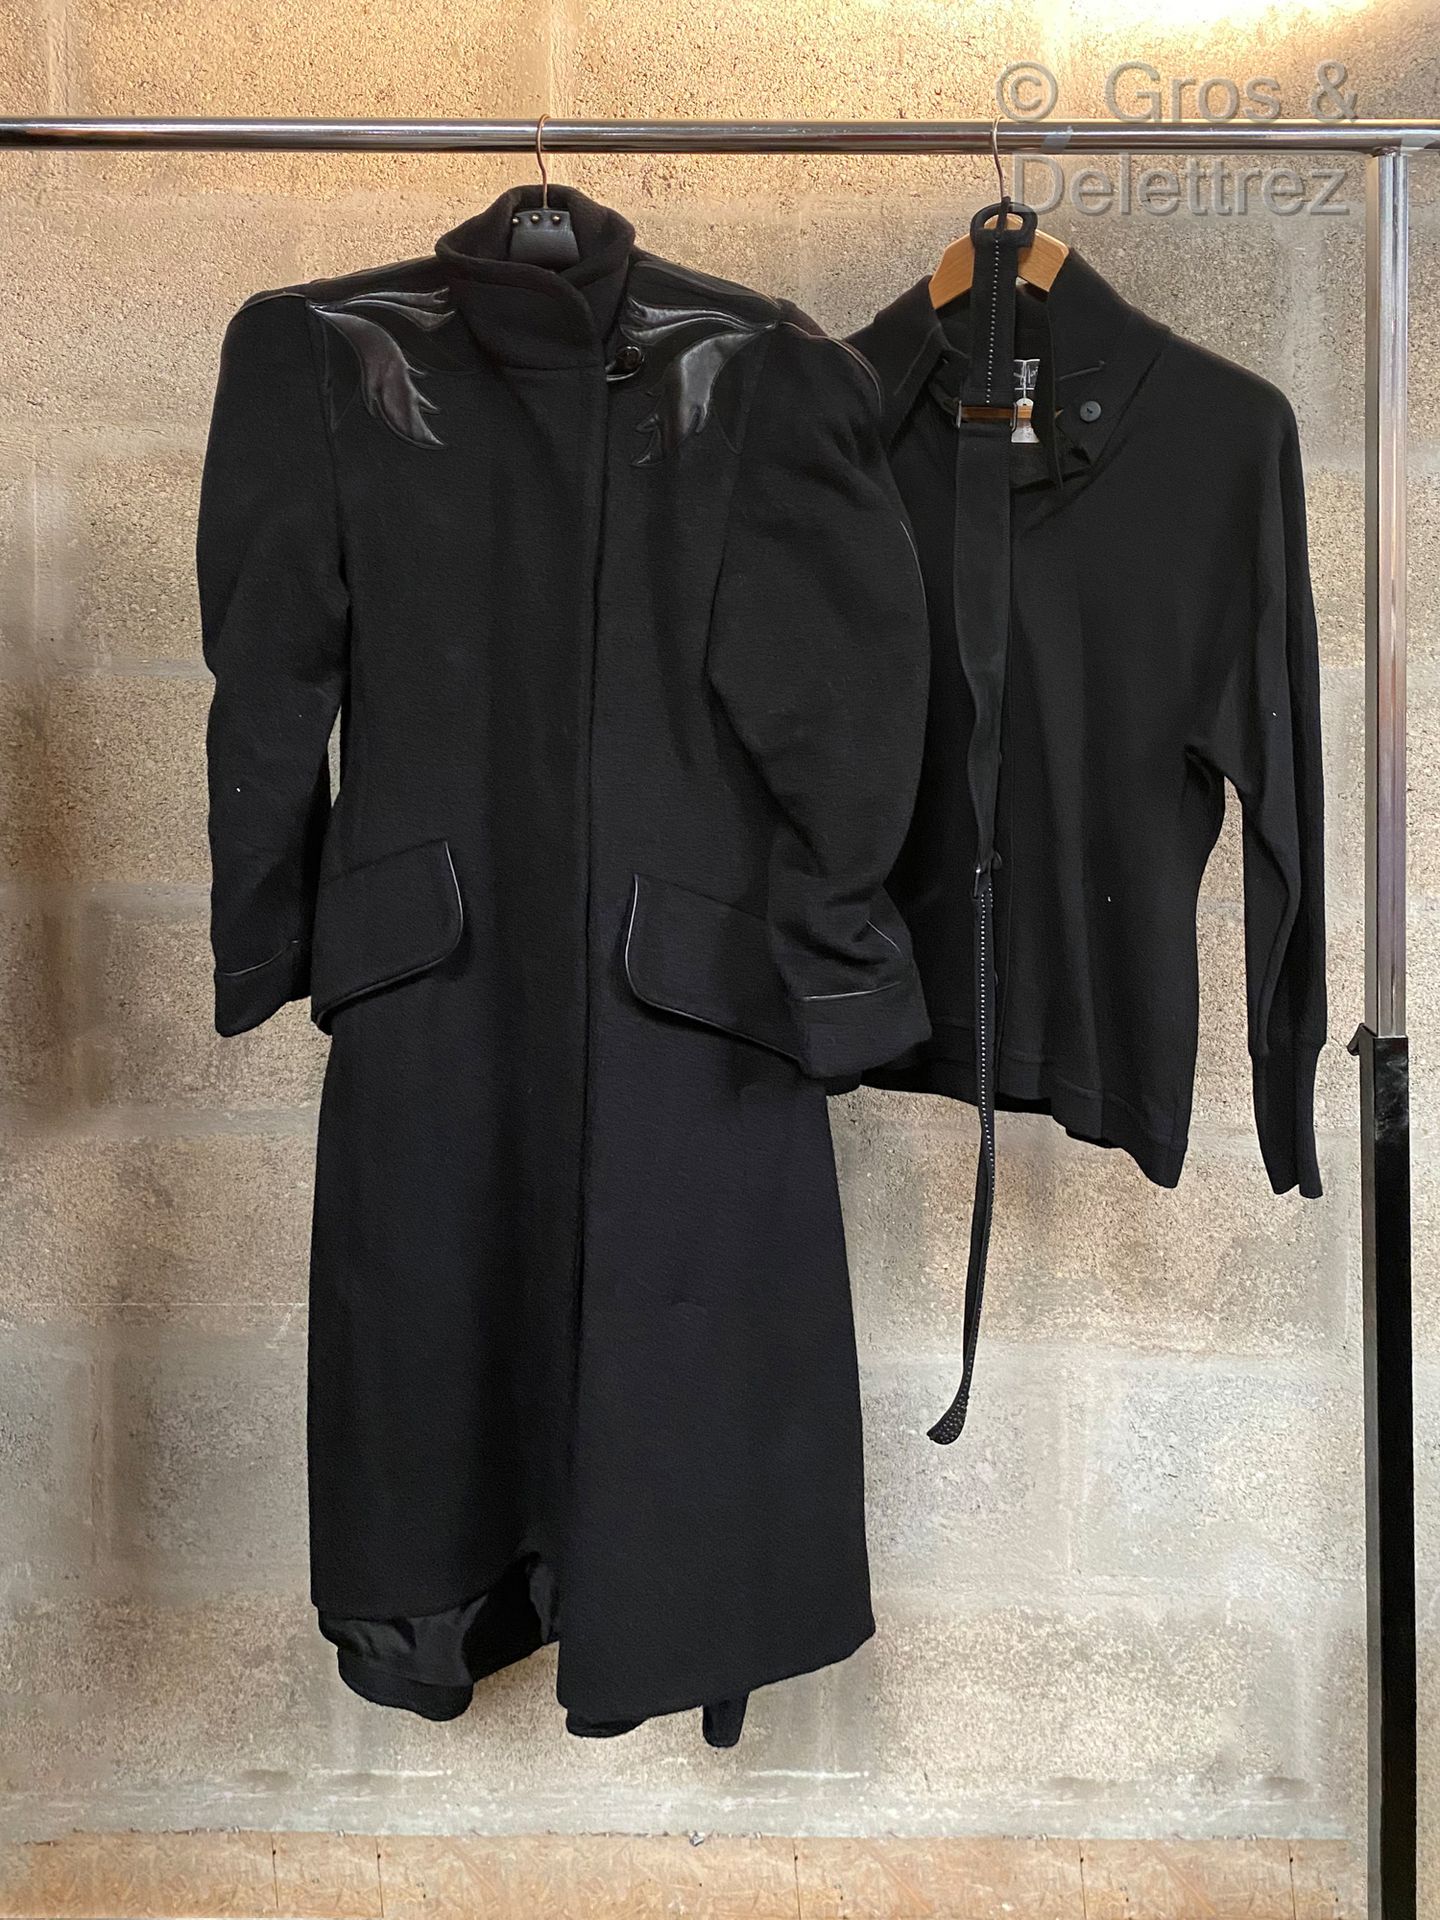 Null CLAUDE MONTANA Prototype Black wool coat with leather yoke, we attach a bla&hellip;